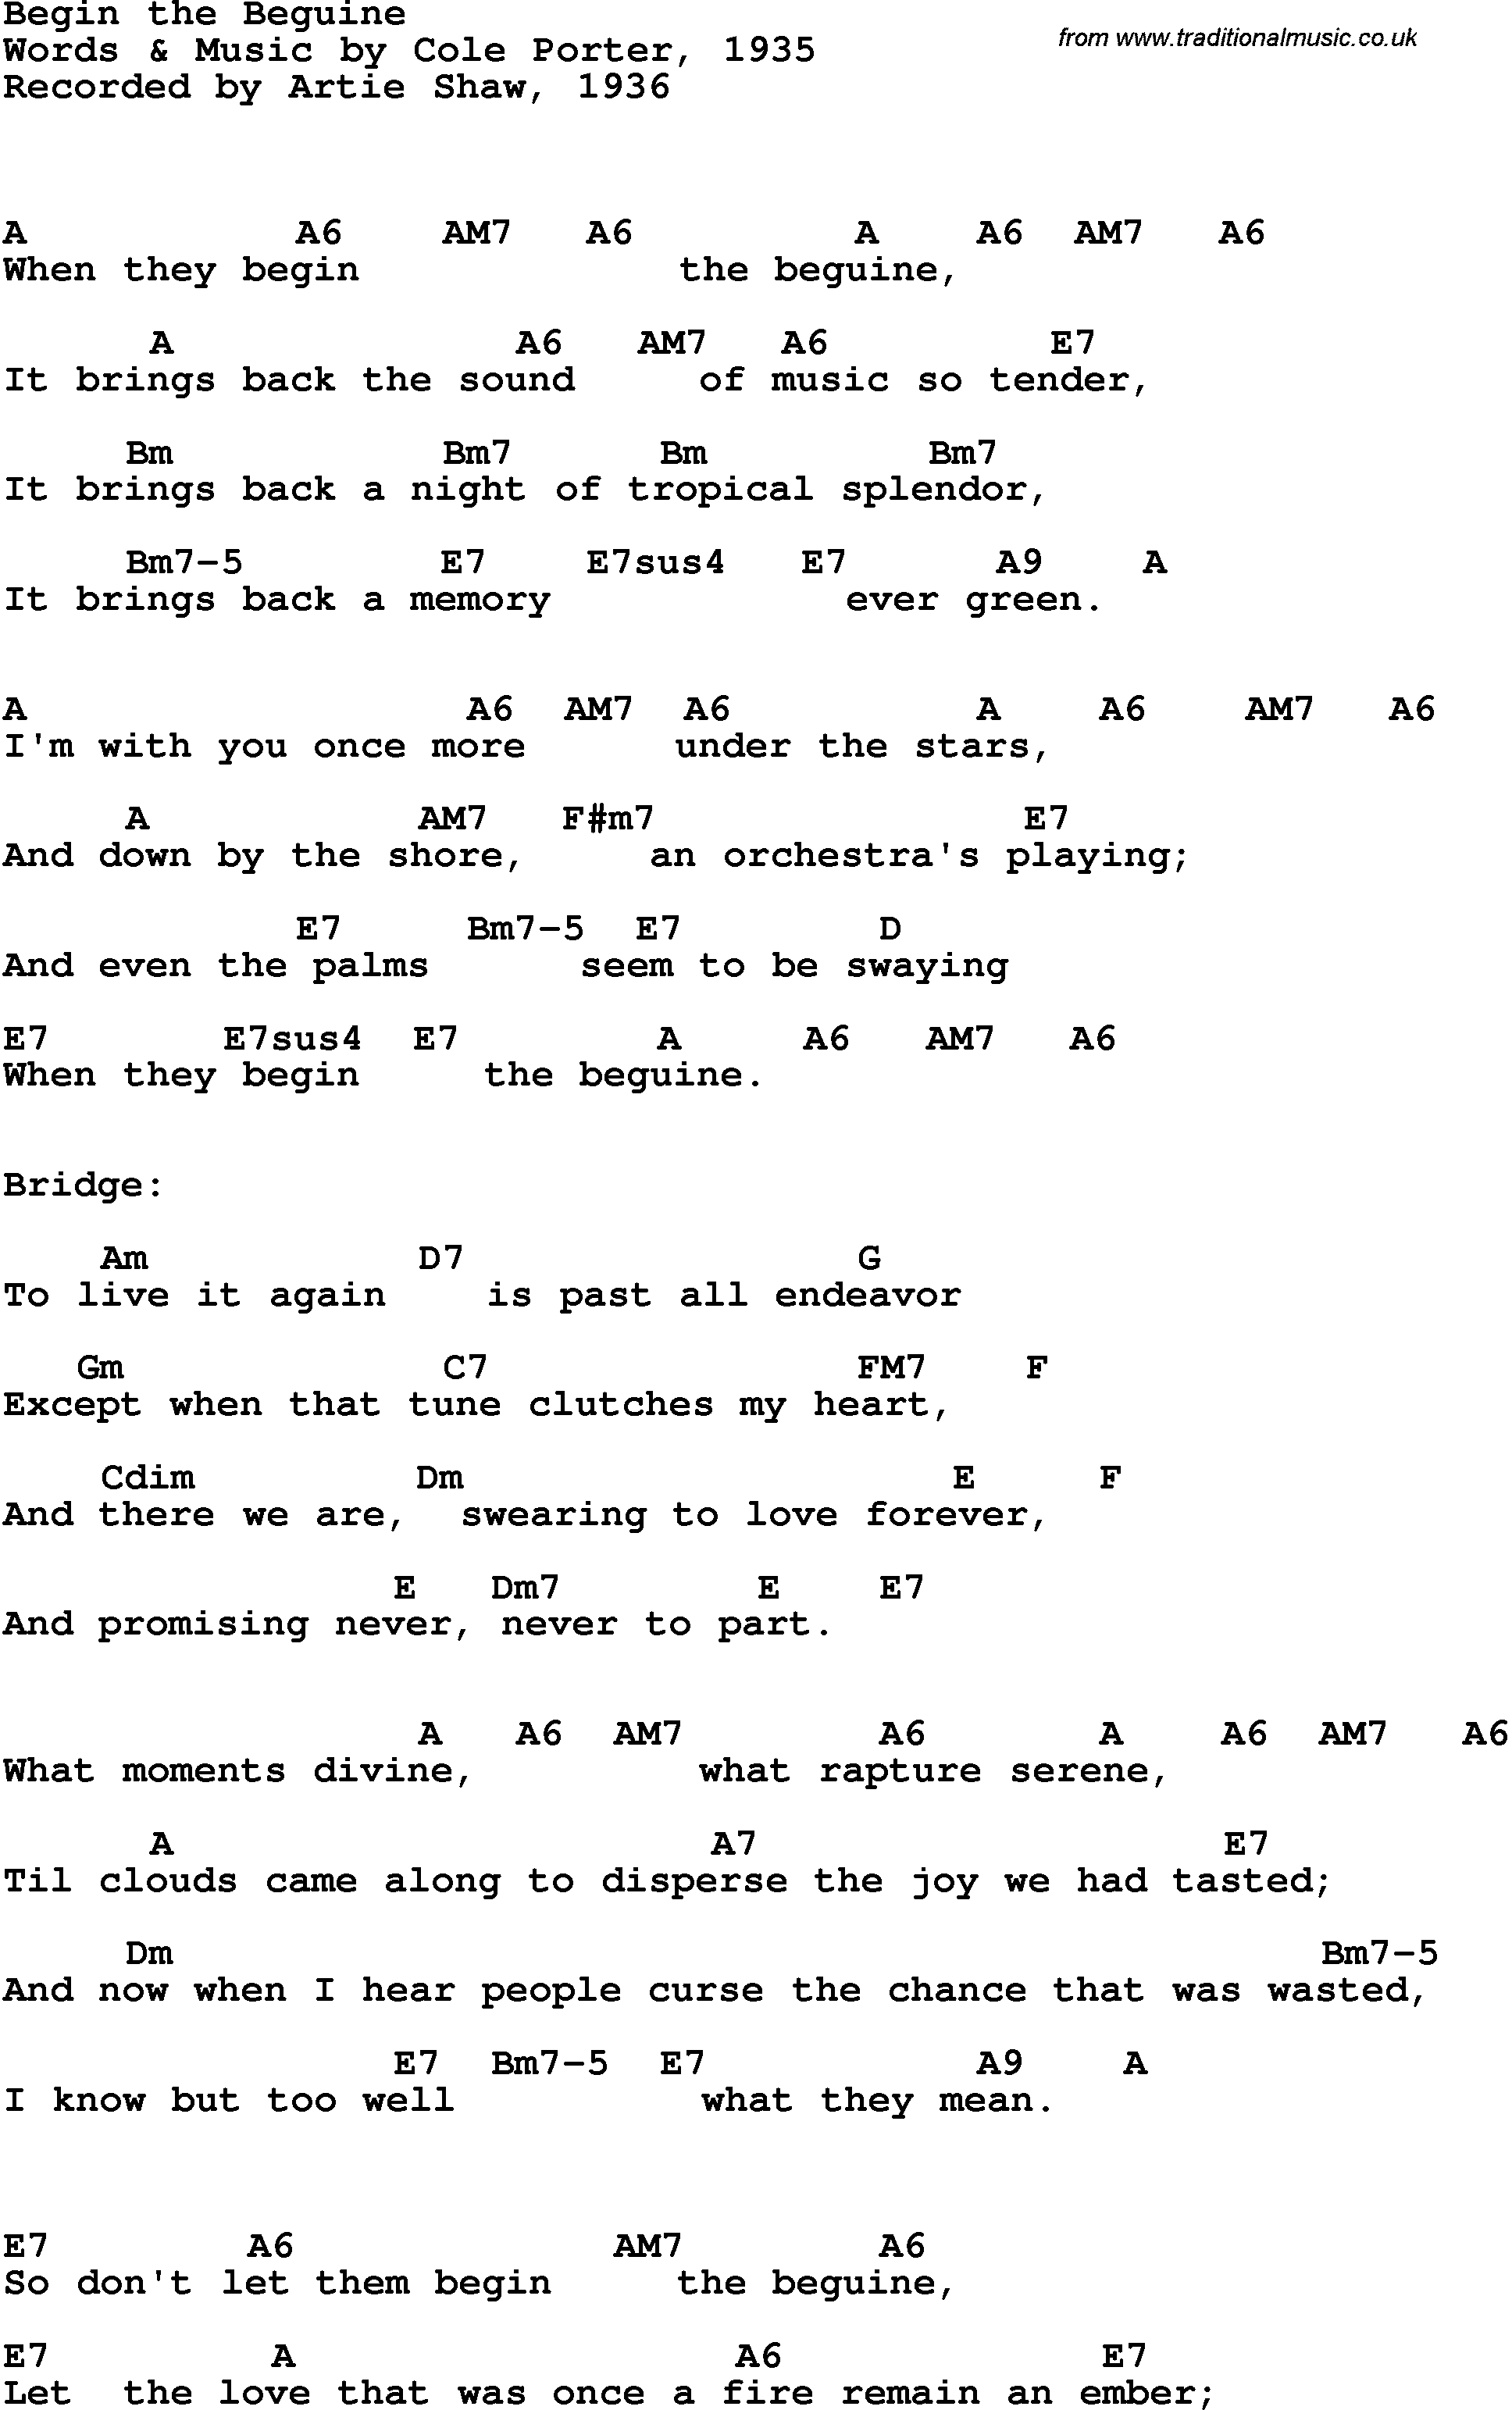 Song Lyrics with guitar chords for Begin The Beguine - Frank Sinatra, 1943